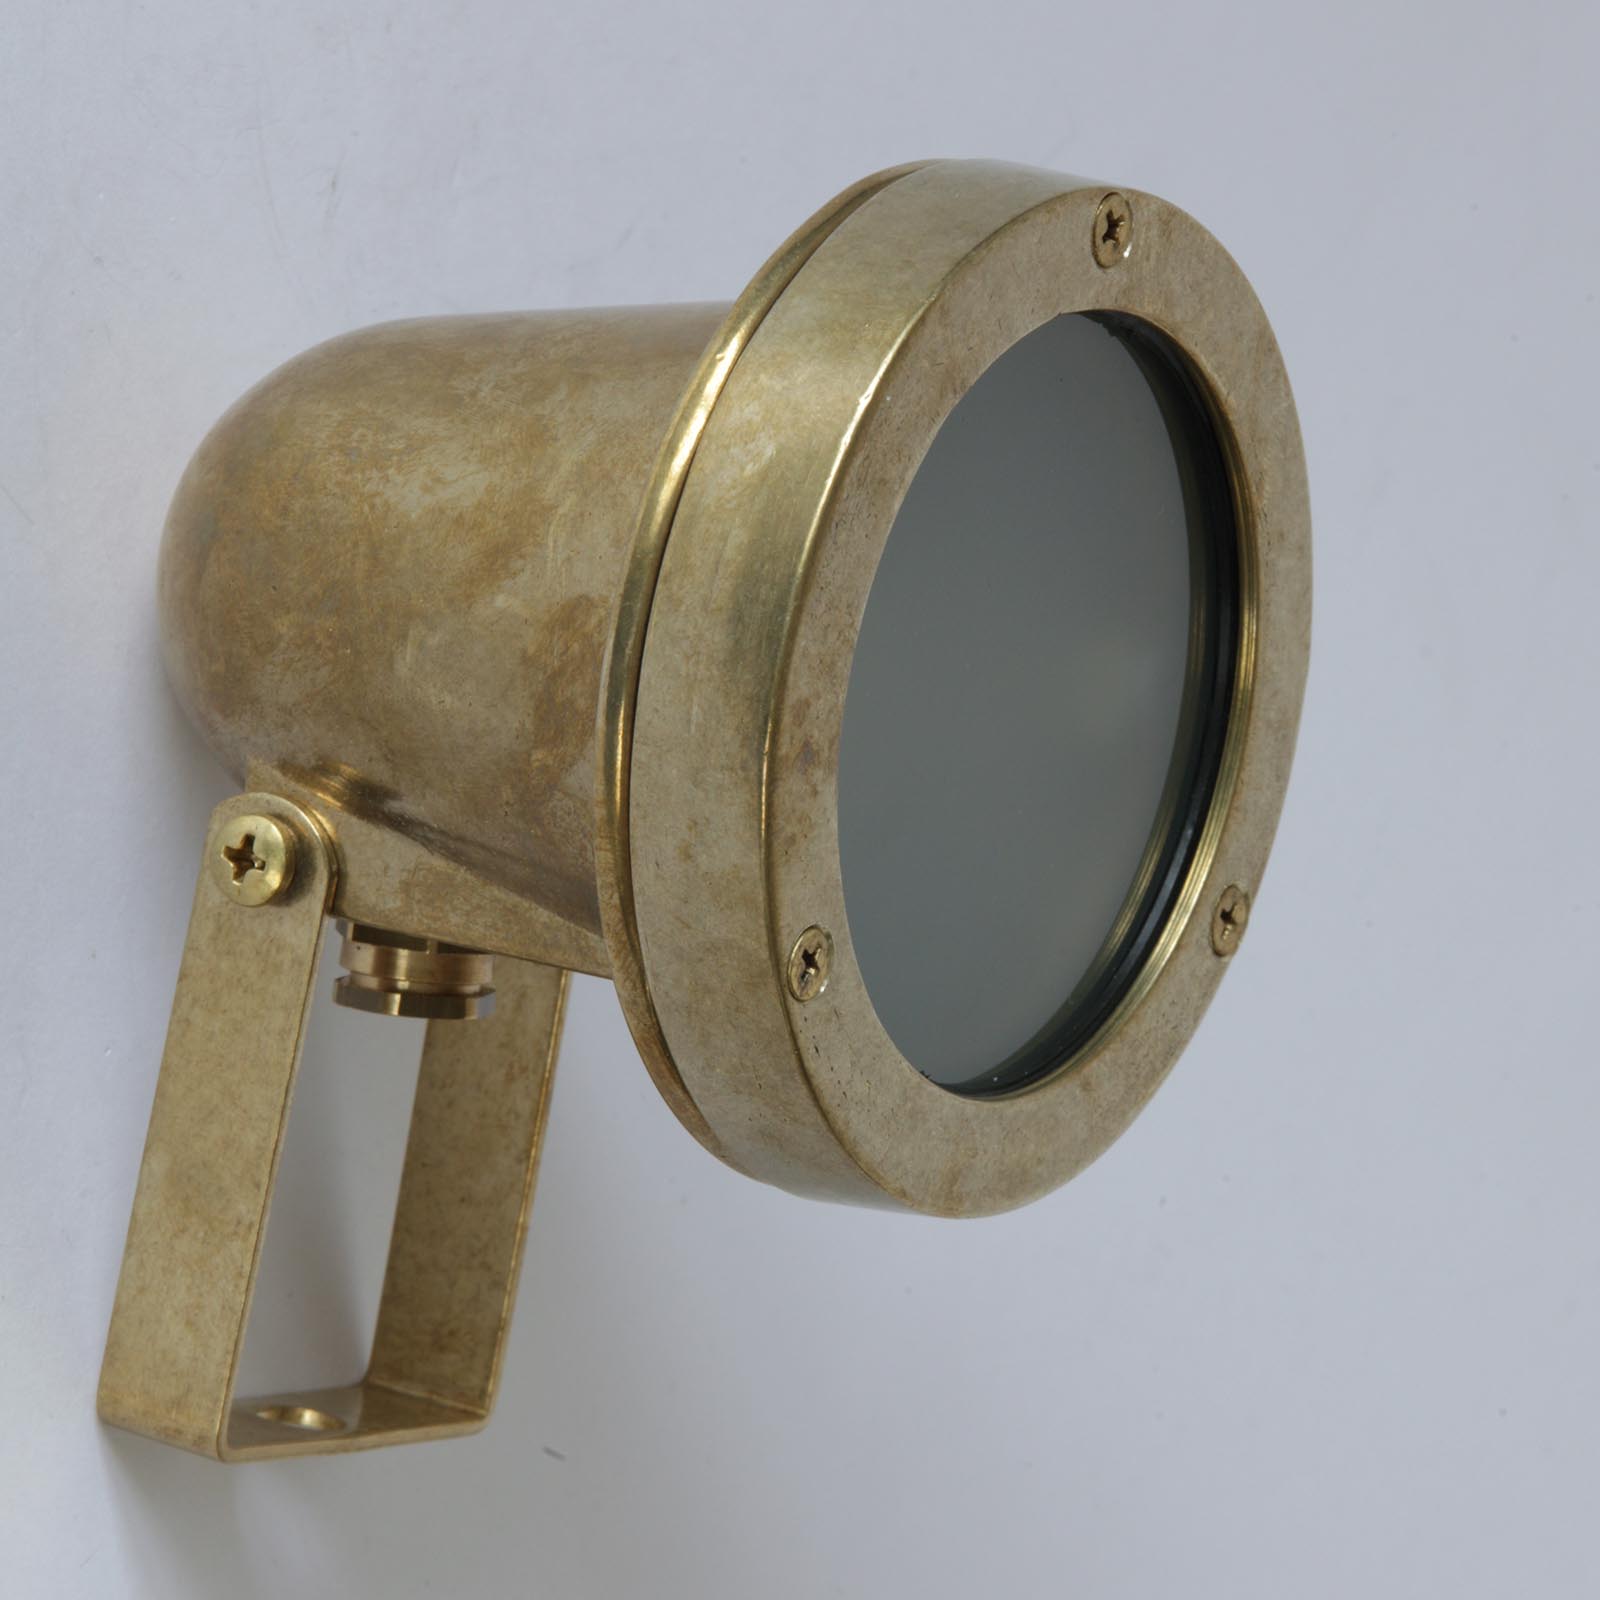 Outdoors brass spot N° 97 for the ceiling, floor or wall